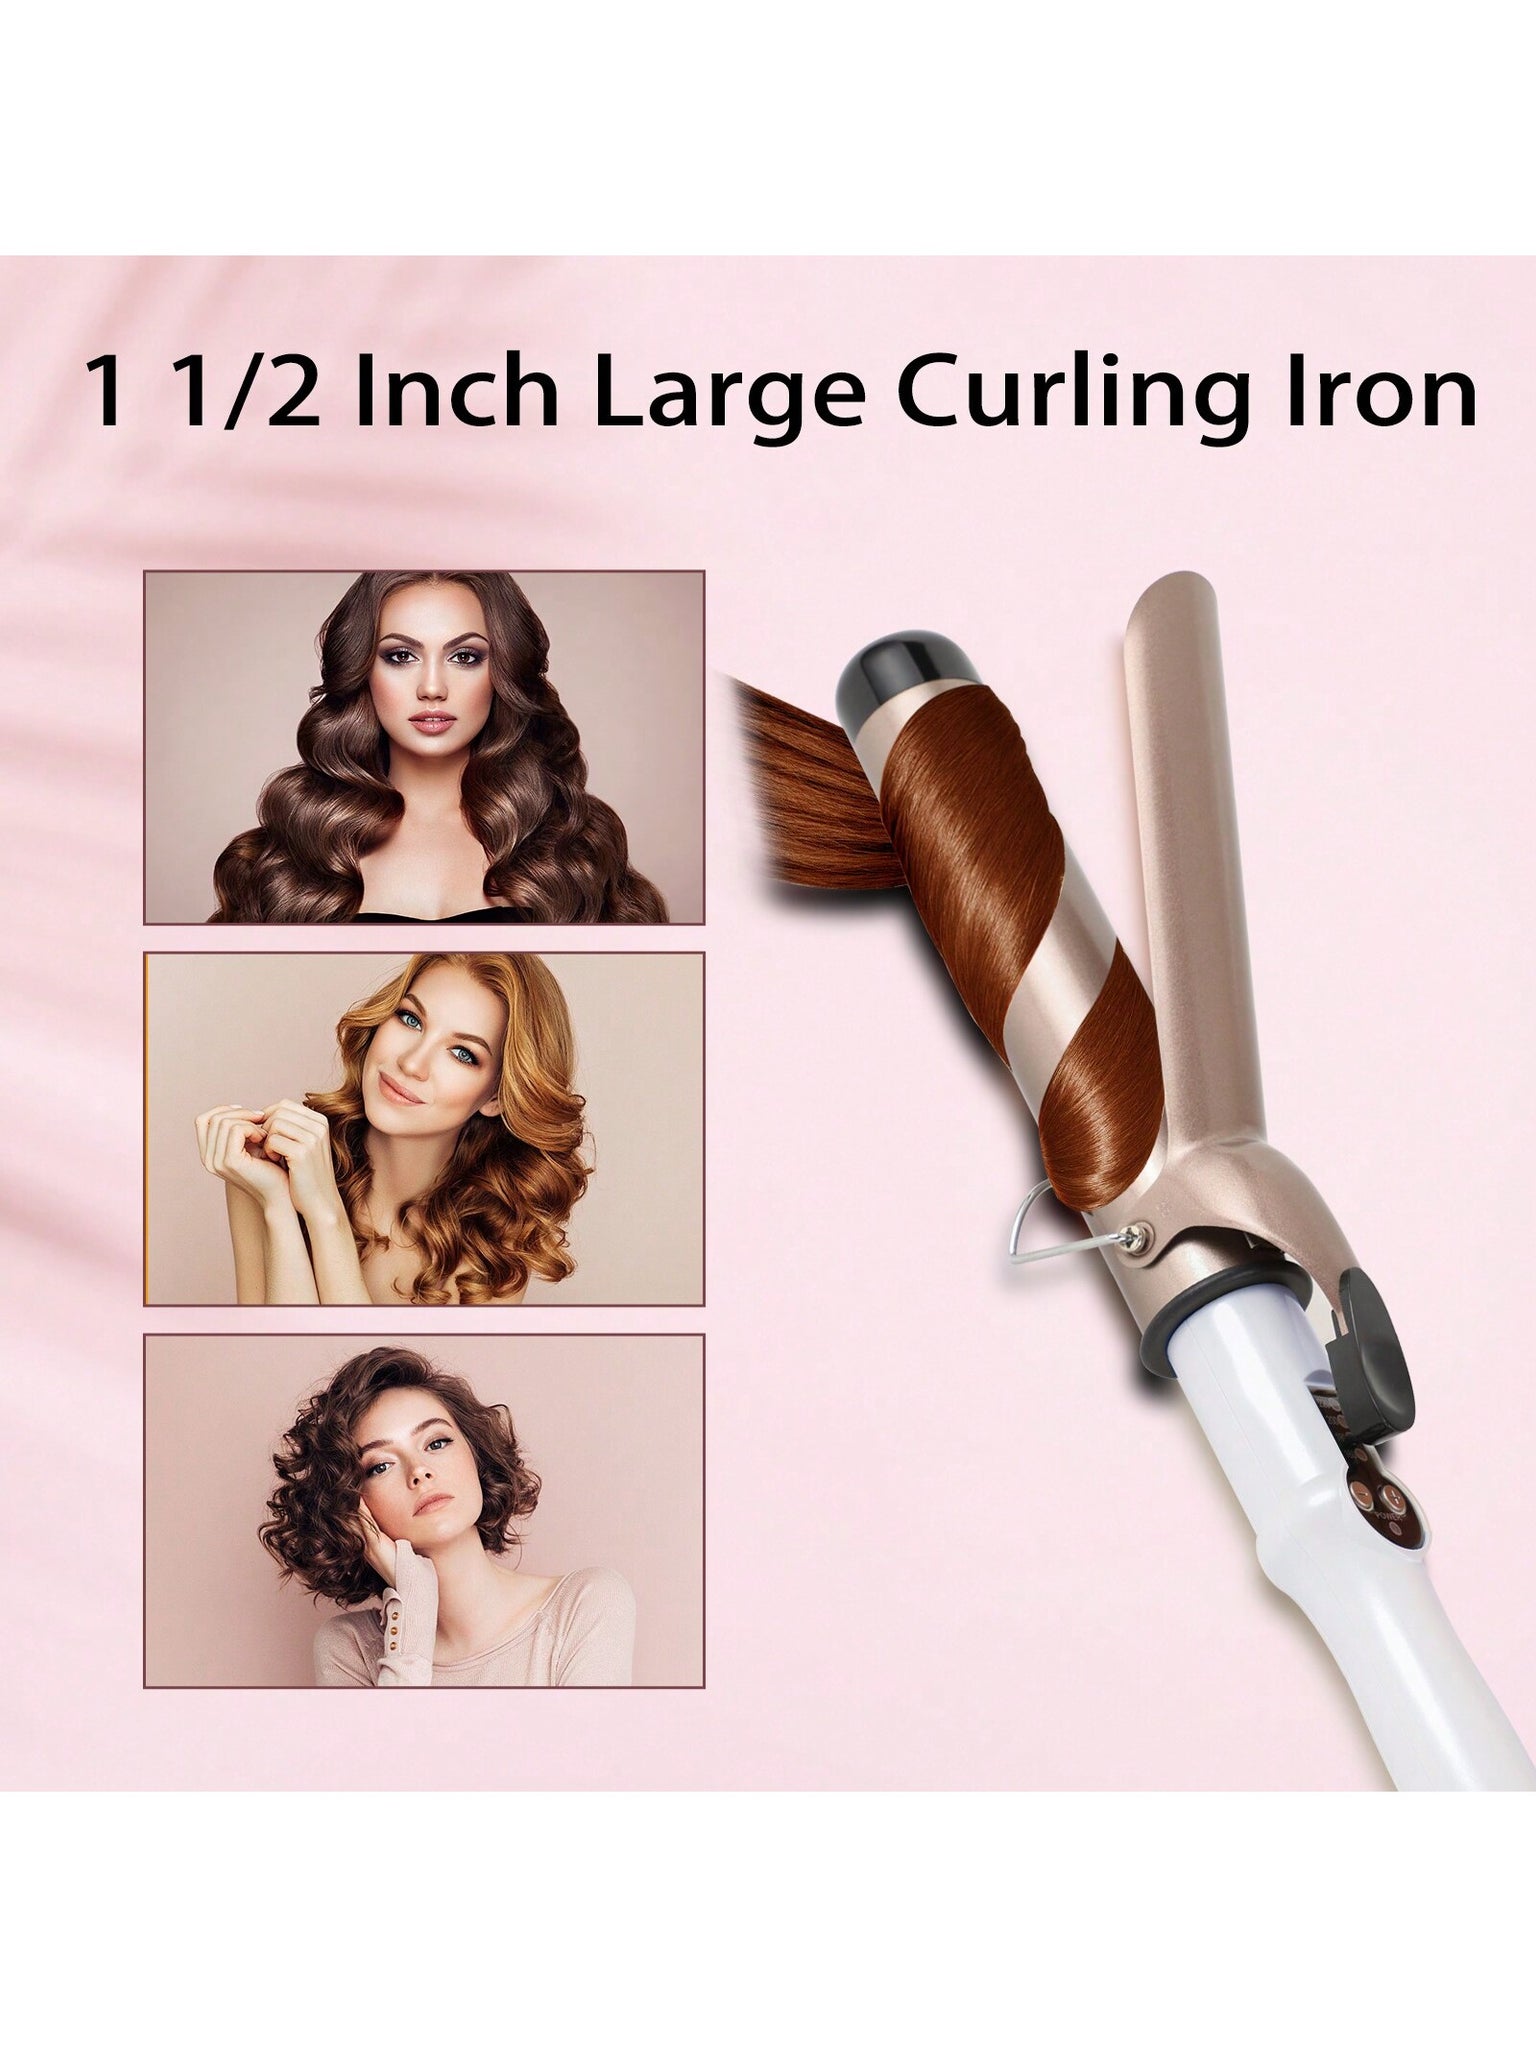 1 1/2 Inch Curling Wand, 38mm Professional Ceramic Tourmaline Coated Barrel Hair Curler With Lcd Display, 4 Heat Settings (160℃-220℃) For All Hair Types, Including Glove-White-2